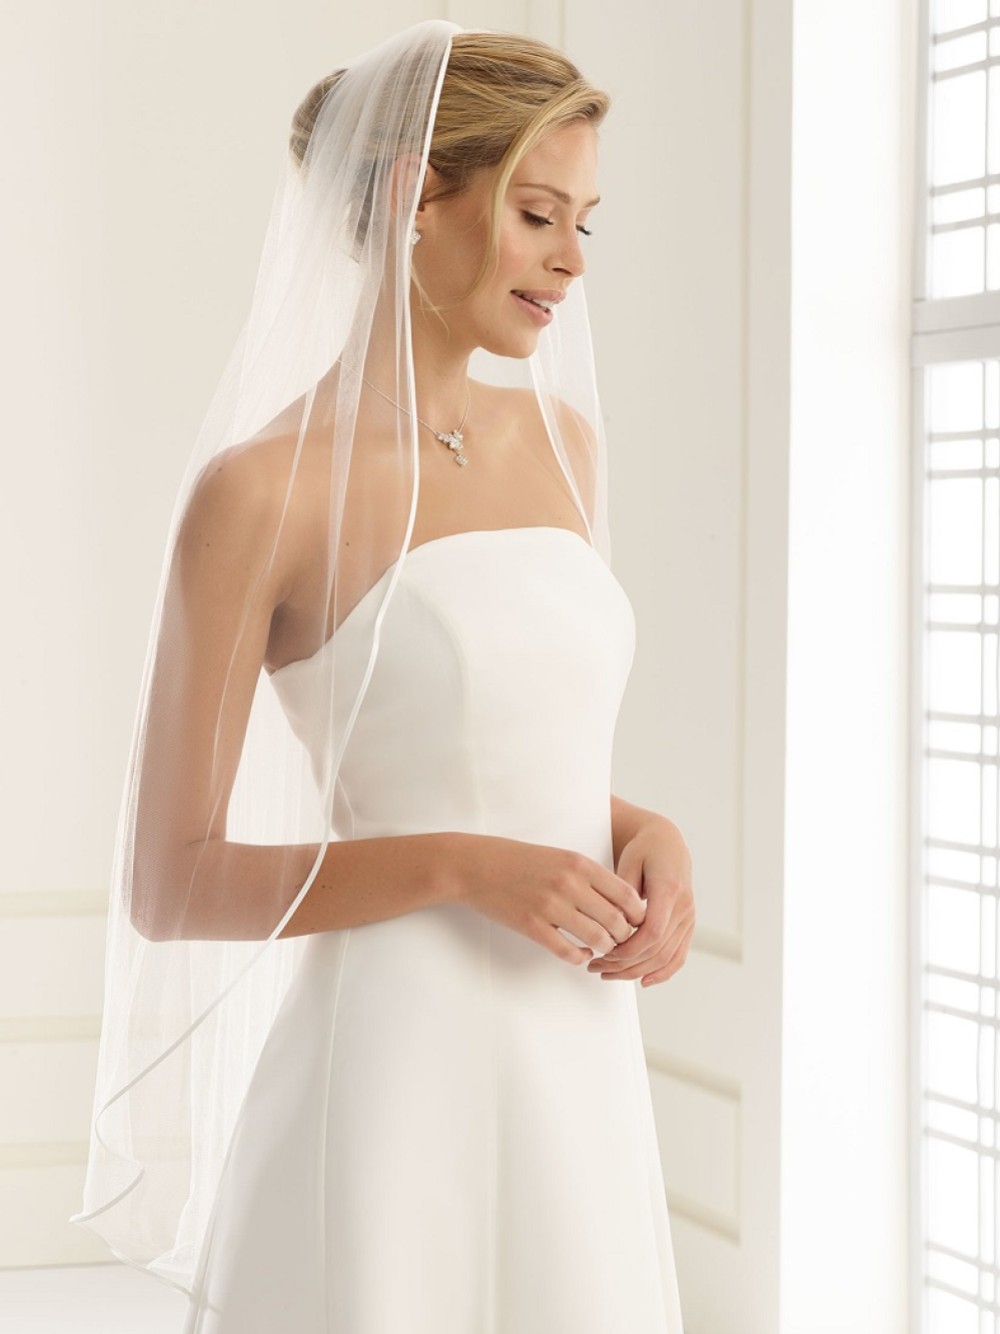 SATIN EDGED IN LIGHT IVORY WHITE OR CHAMPAGNE SHORT 3 TIER VEIL WITH COMB 